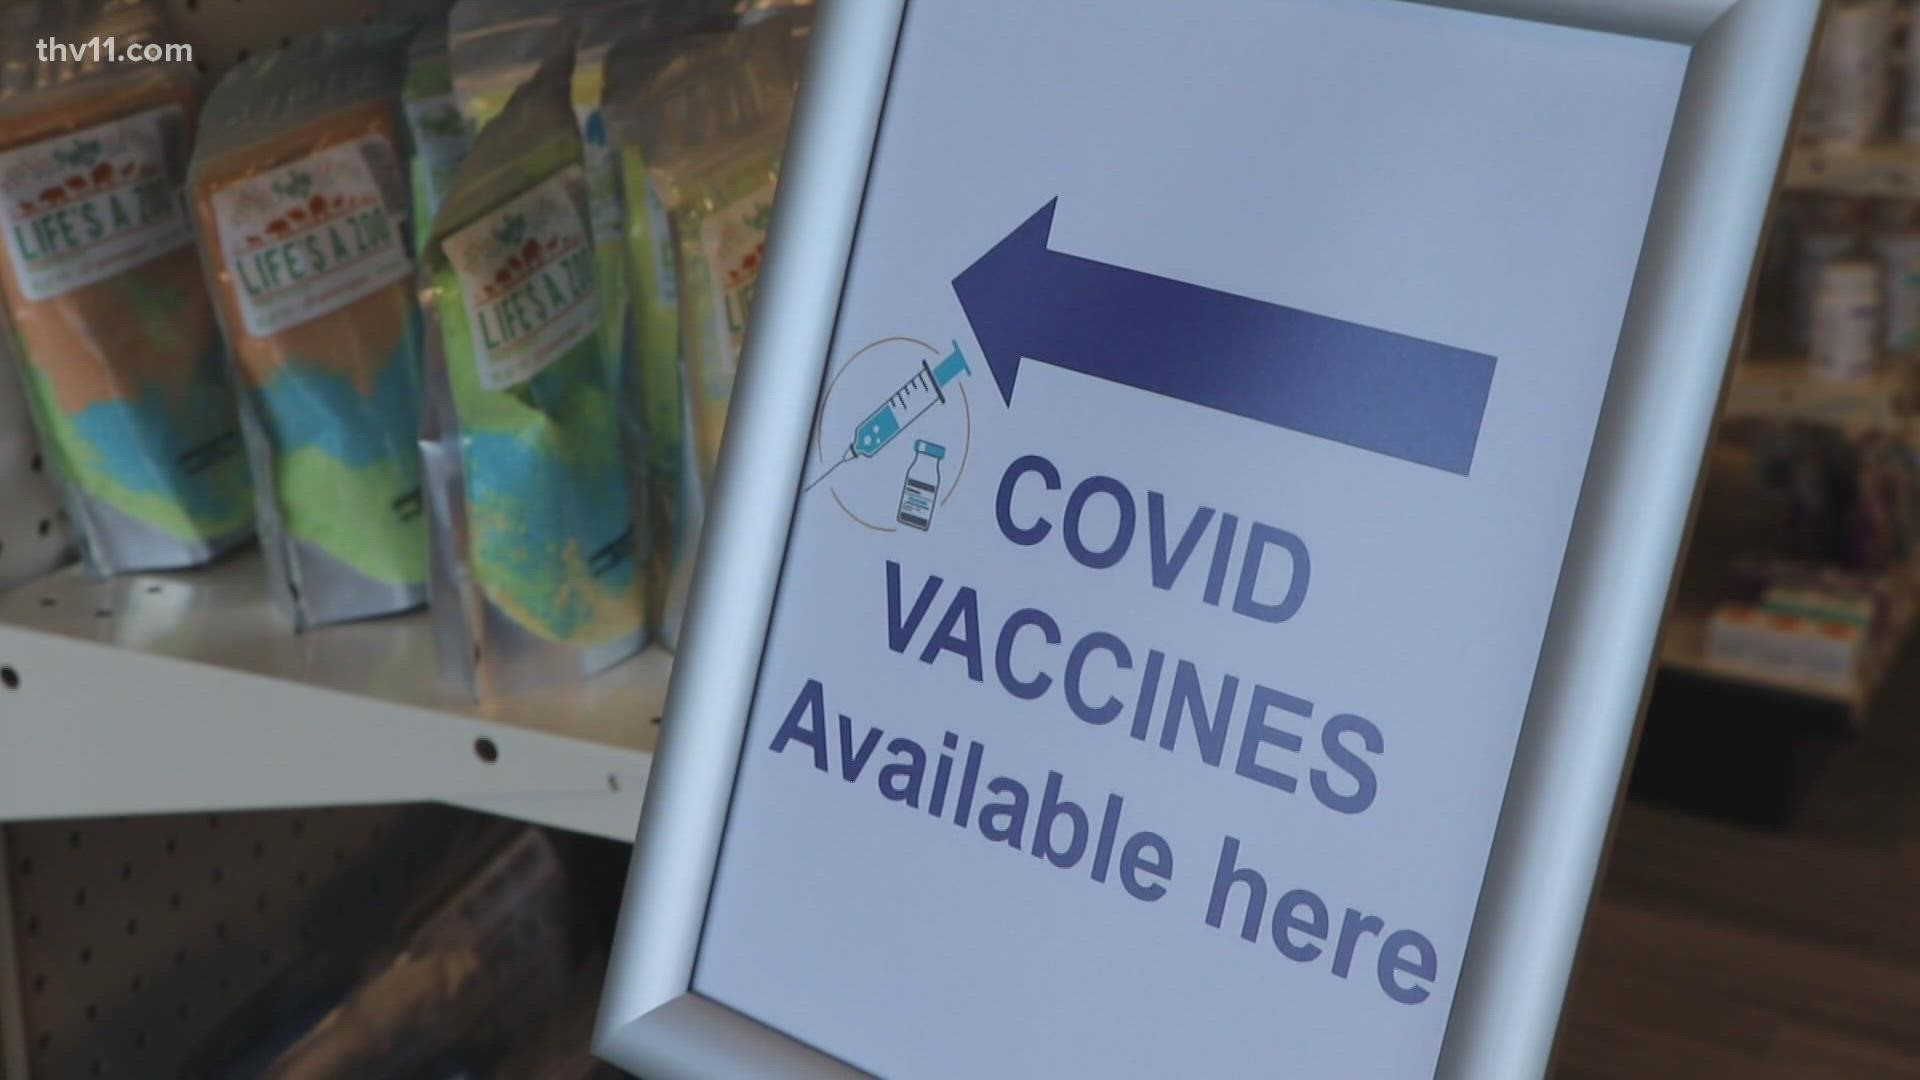 Kids in Arkansas can now get vaccinated for COVID-19.